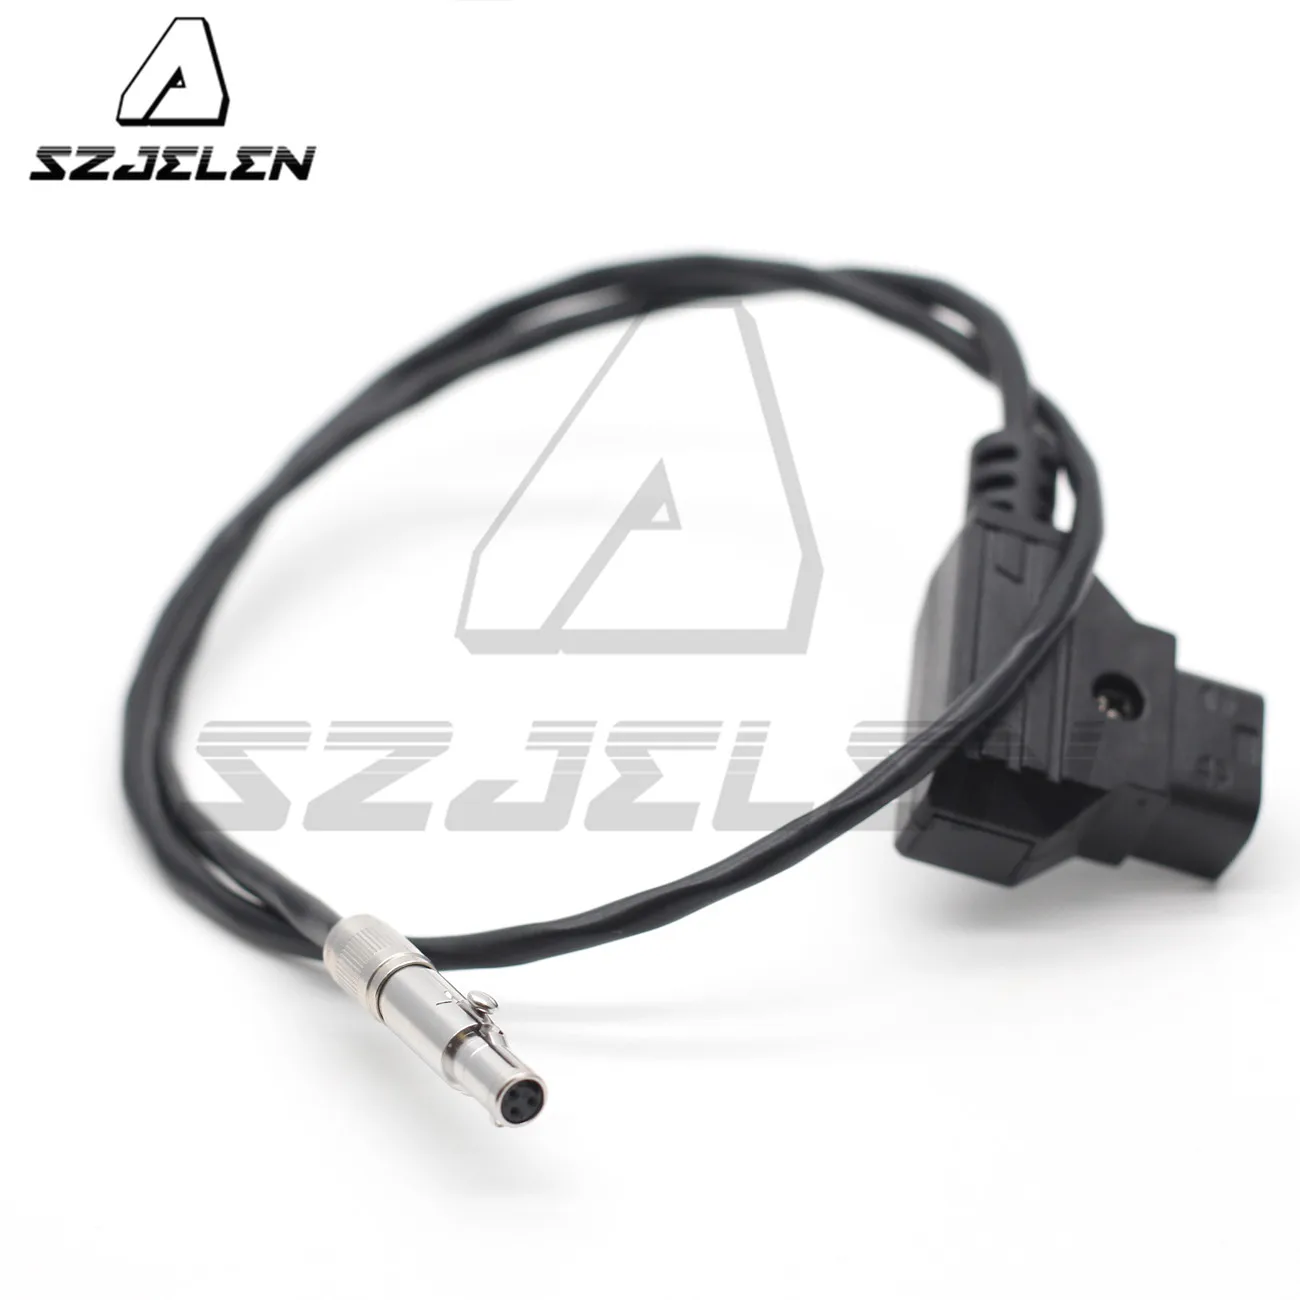 3pin plug to d-tap for Camera monitor power cord Odyssey 7Q, Odyssey 7 monitor power cable 80cm